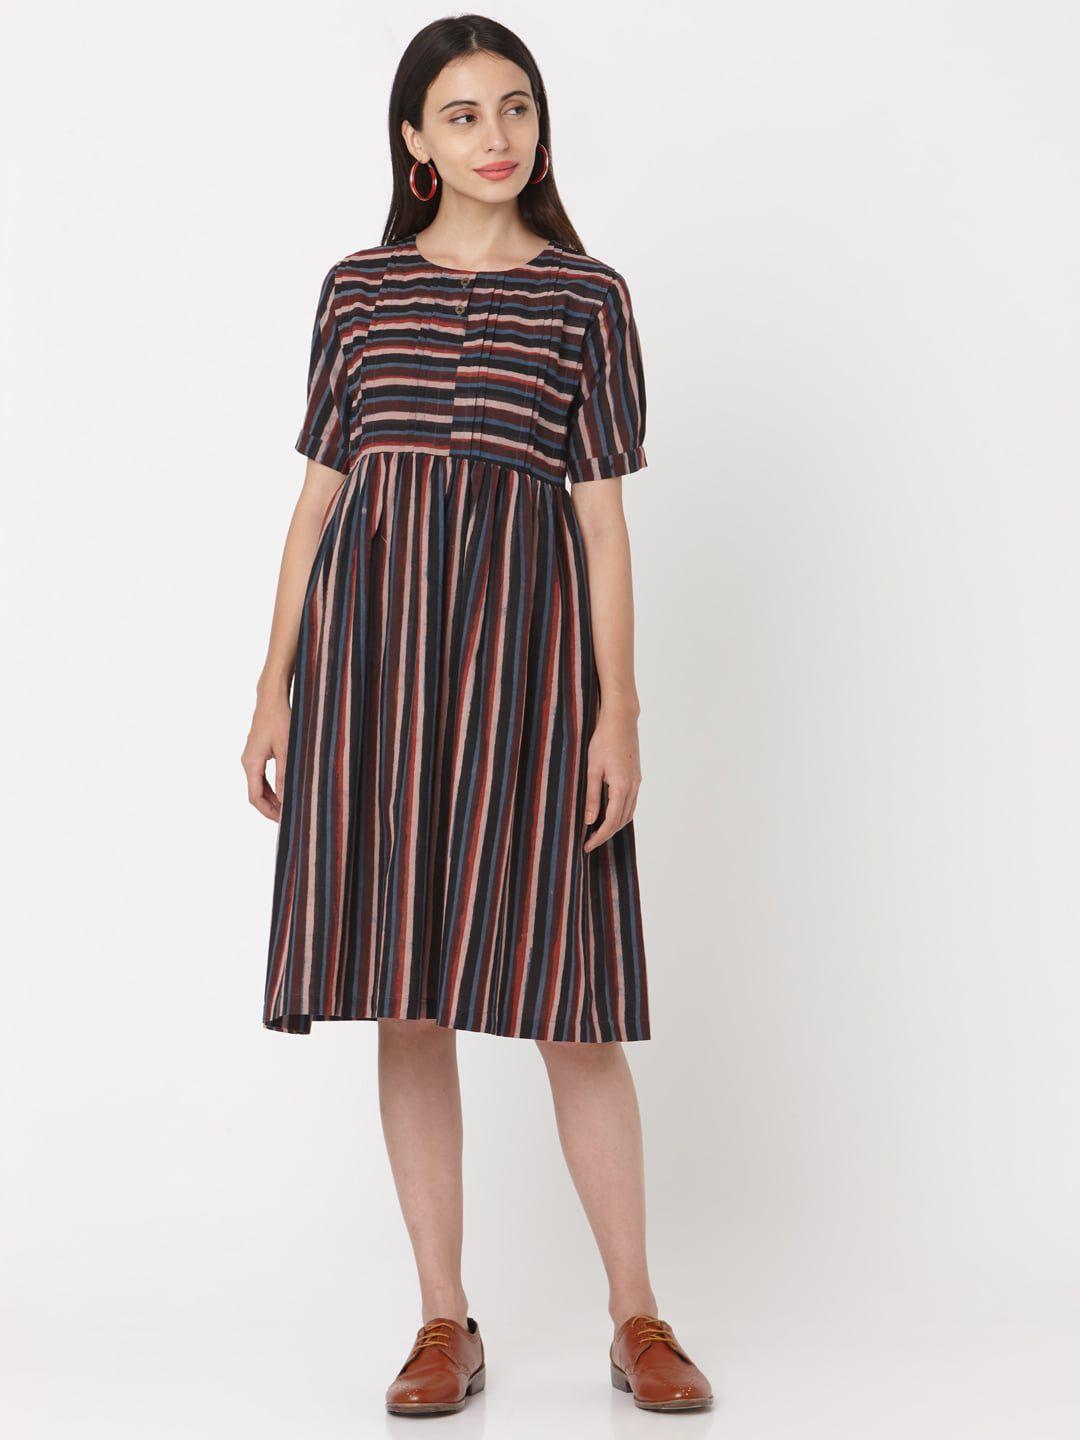 saanjh maroon striped cotton fit & flare dress